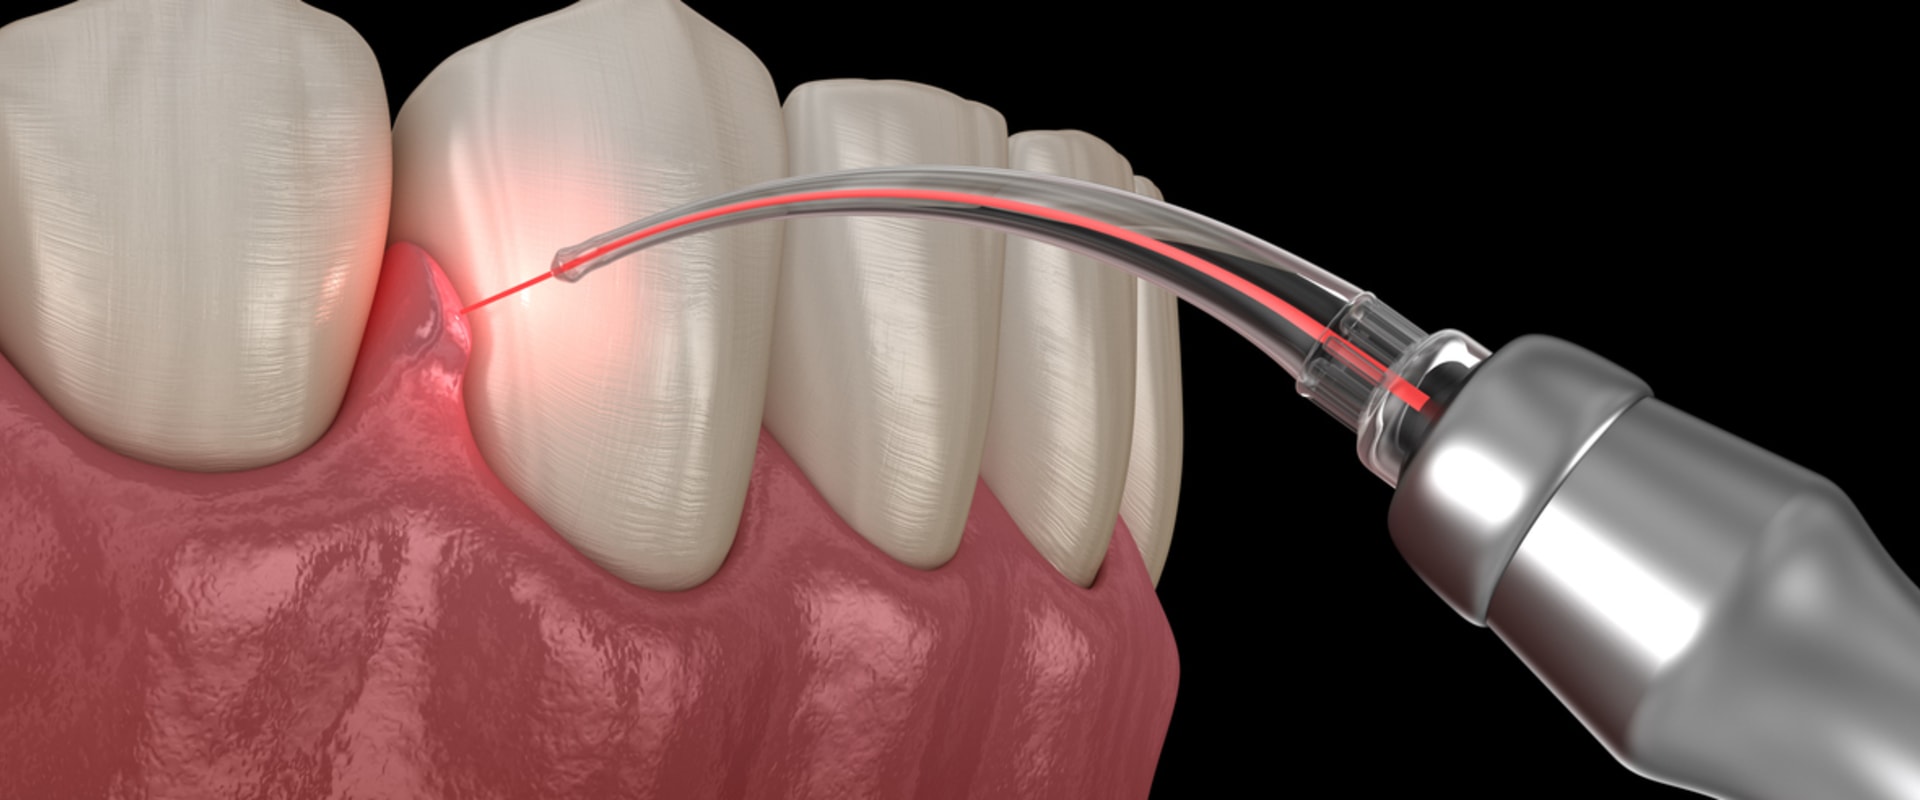 What is the Best Surgery for Periodontal Disease?